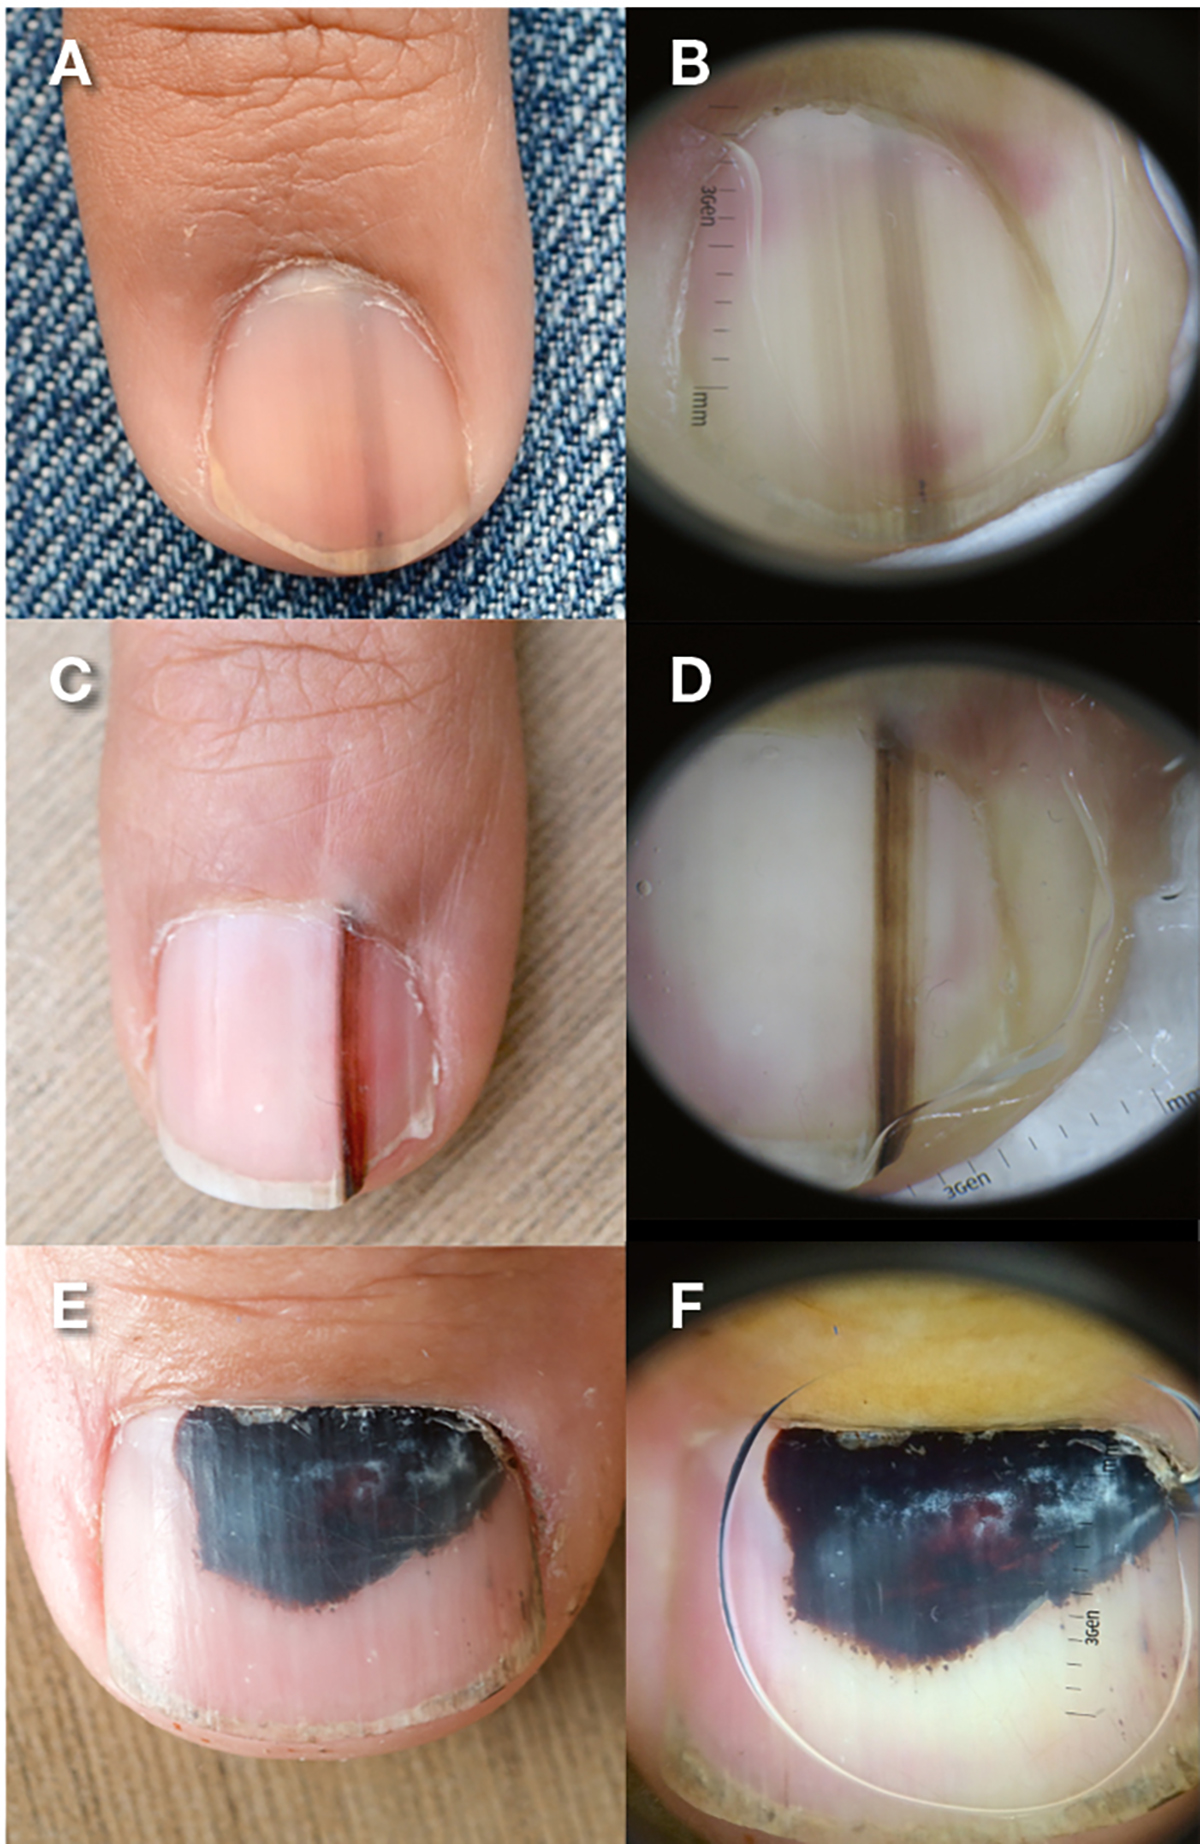 RACGP - Pigmented lesions of the nail bed – Clinical assessment and biopsy